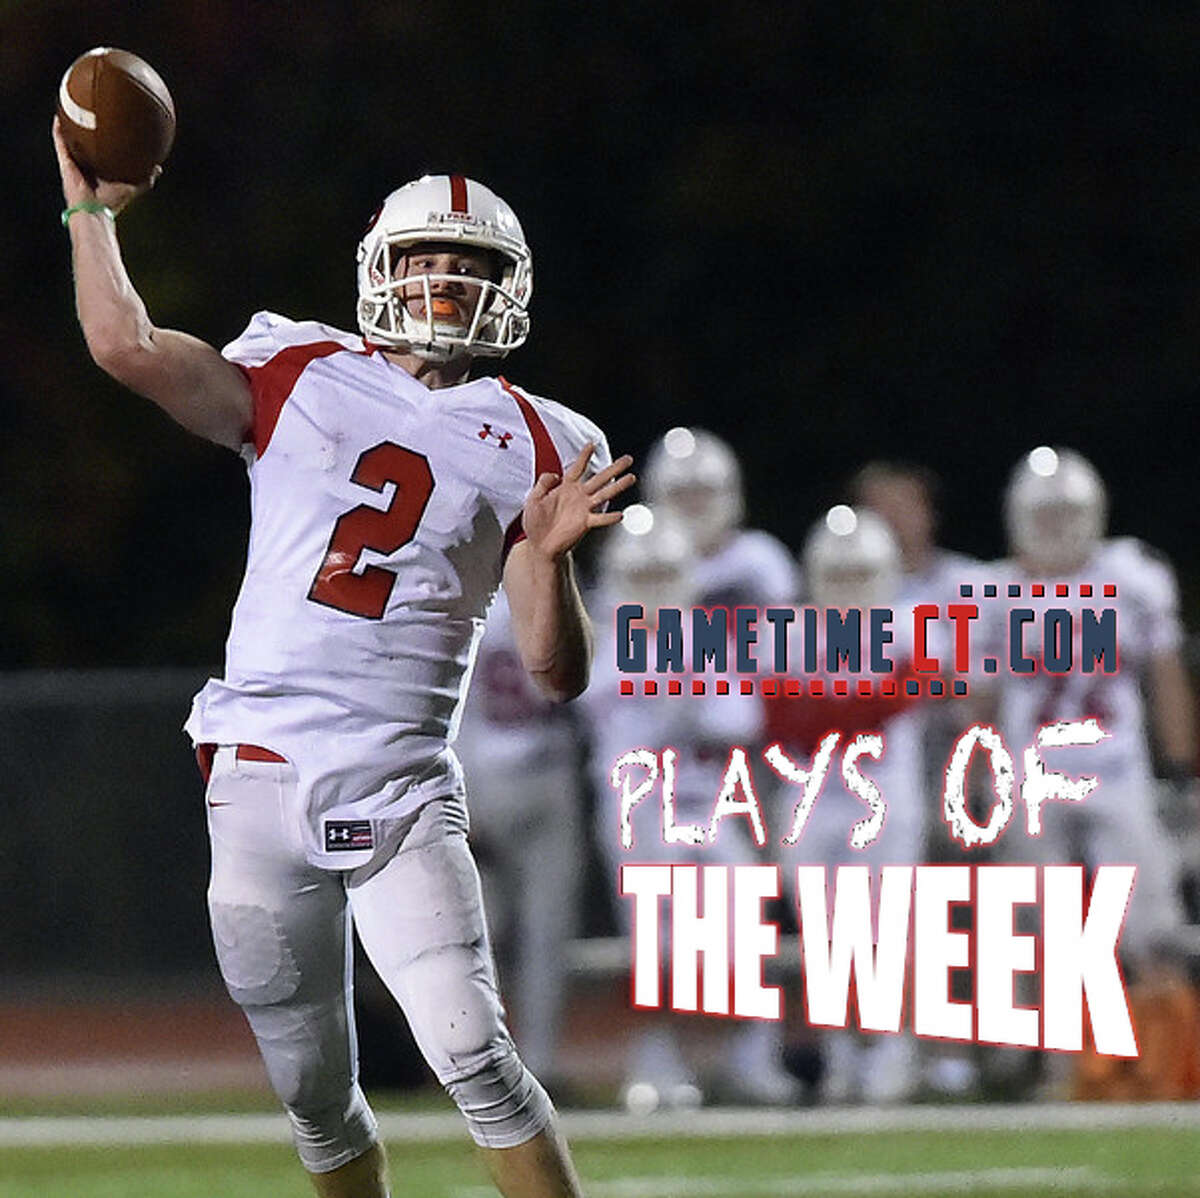 Fairfield Prep’s Colton Smith had over 500 yards of total offense in Prep’s 51-28 victory over Cheshire (Photo Catherine Avalone, Graphic Sean Patrick Bowley)